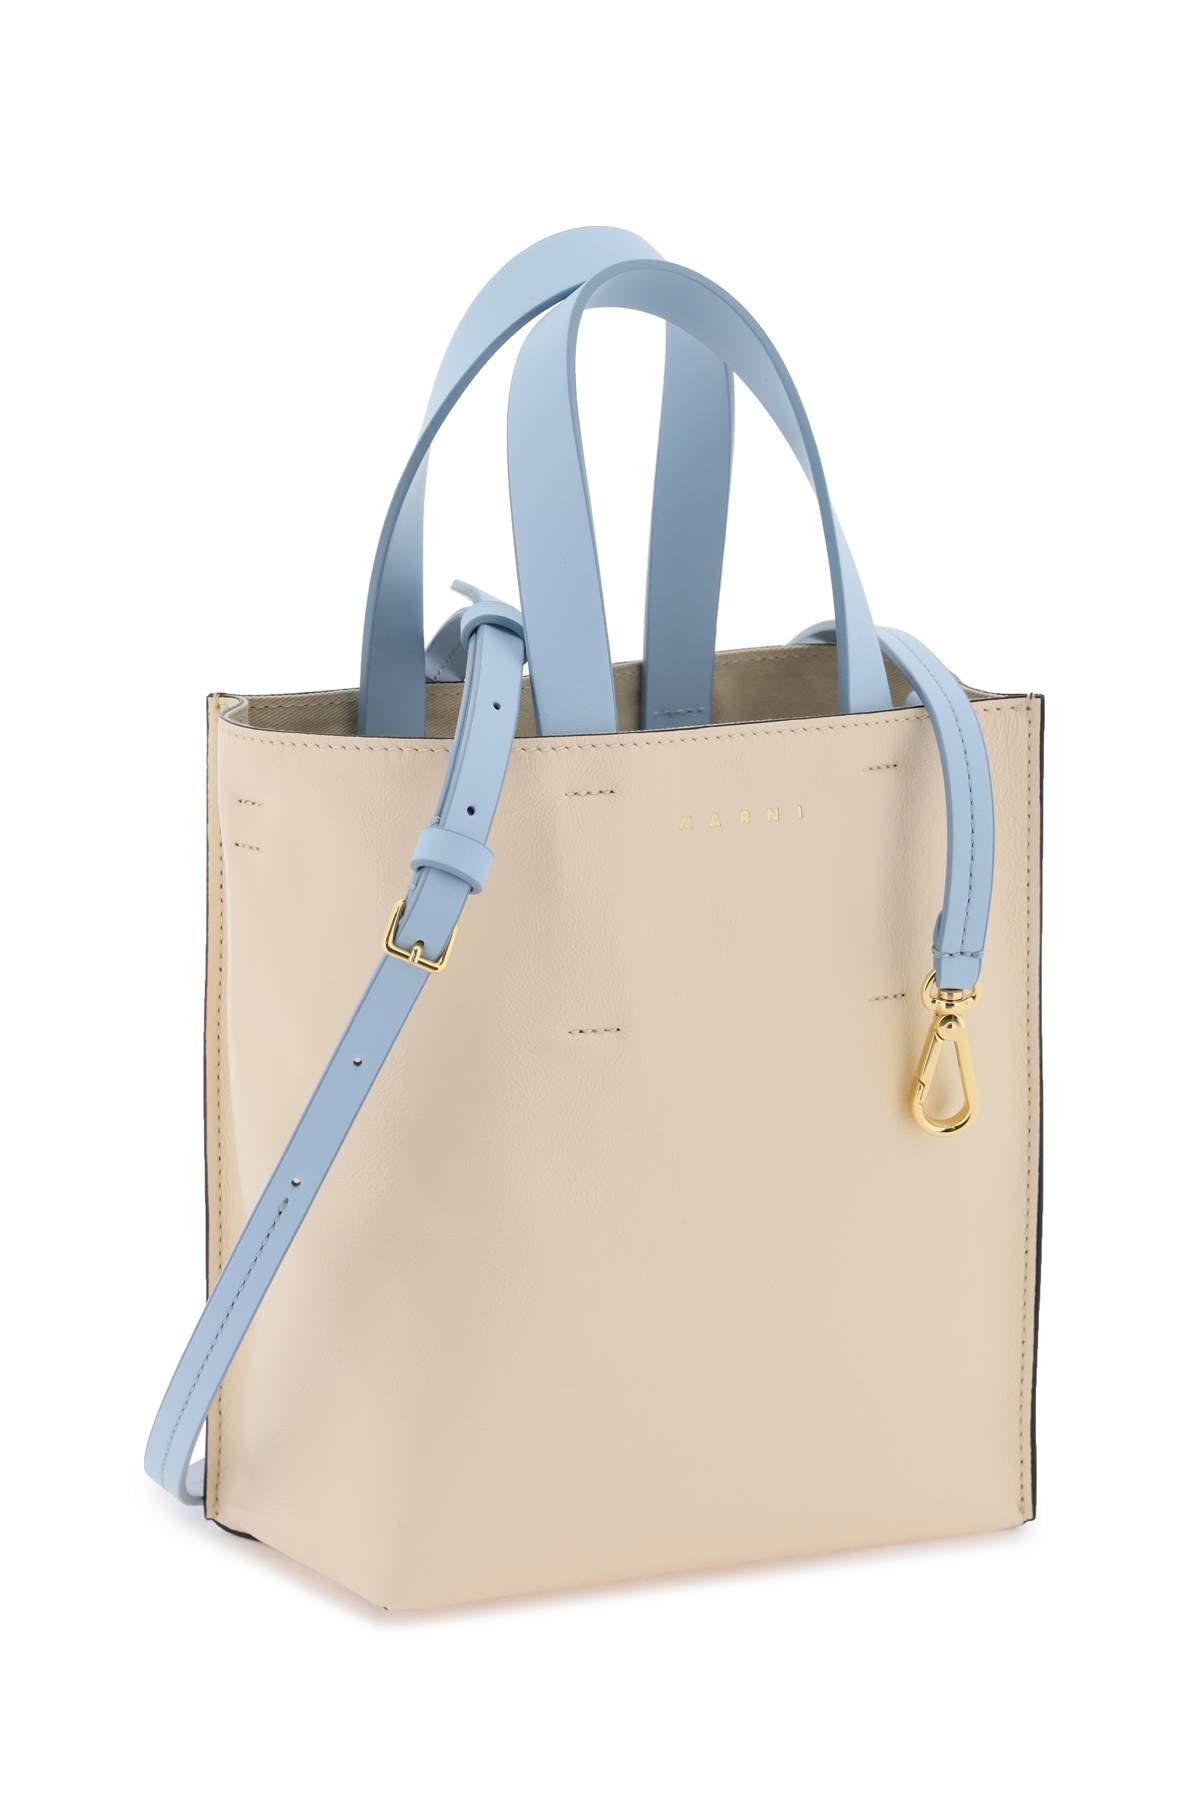 MARNI Bicolor Leather Tote Handbag for Women with Contrast Handles and Removable Strap